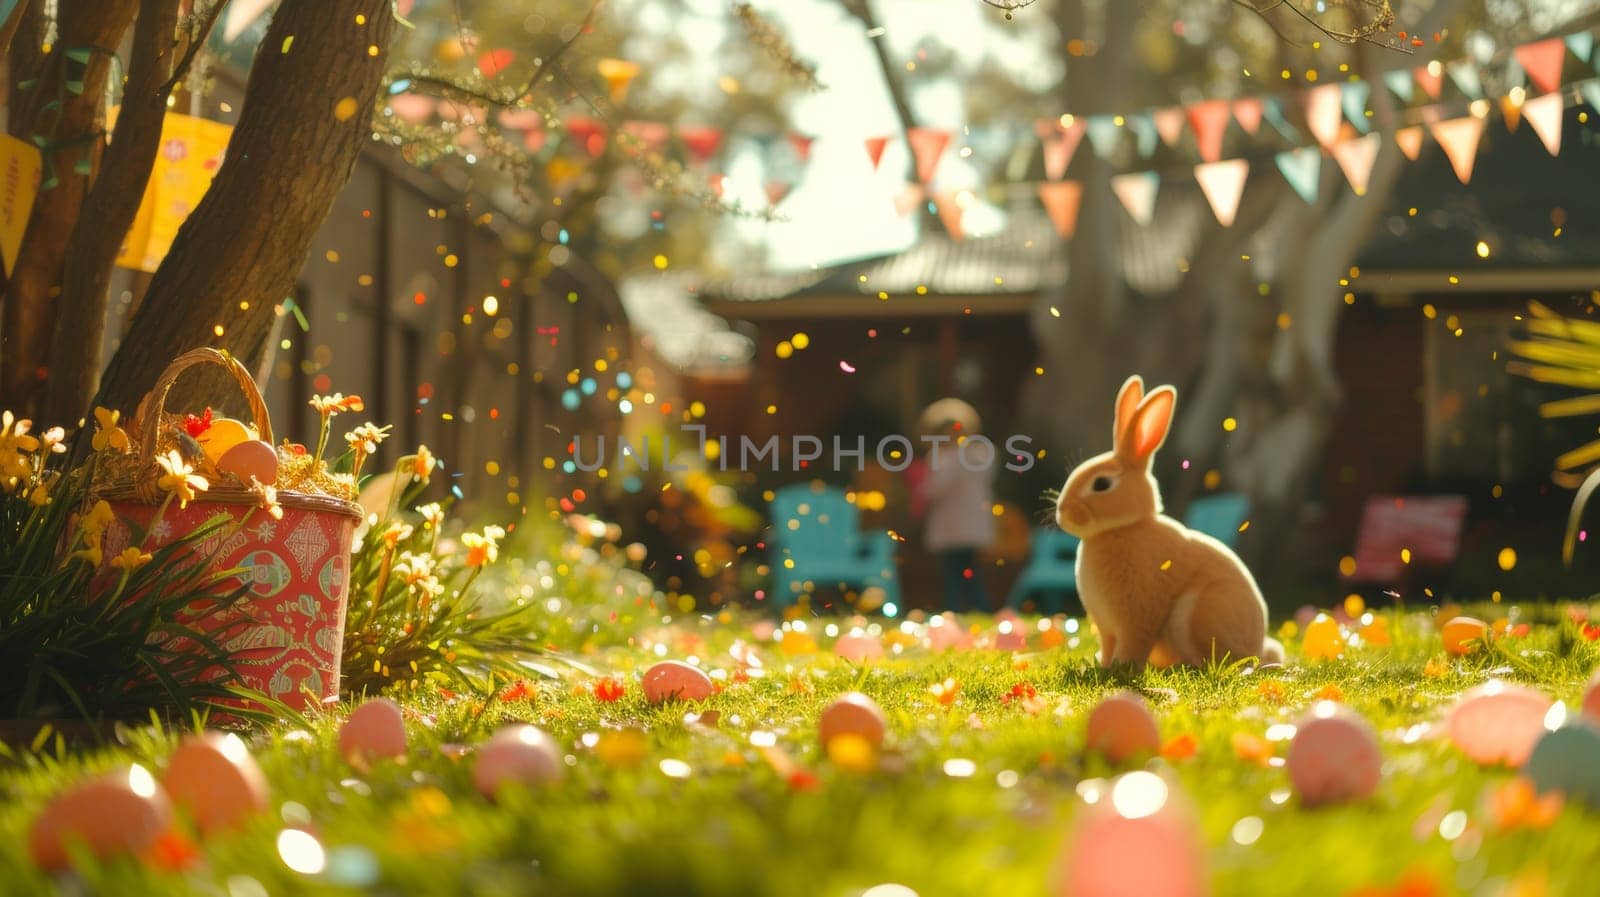 A bunny sitting in a field of colorful eggs and confetti